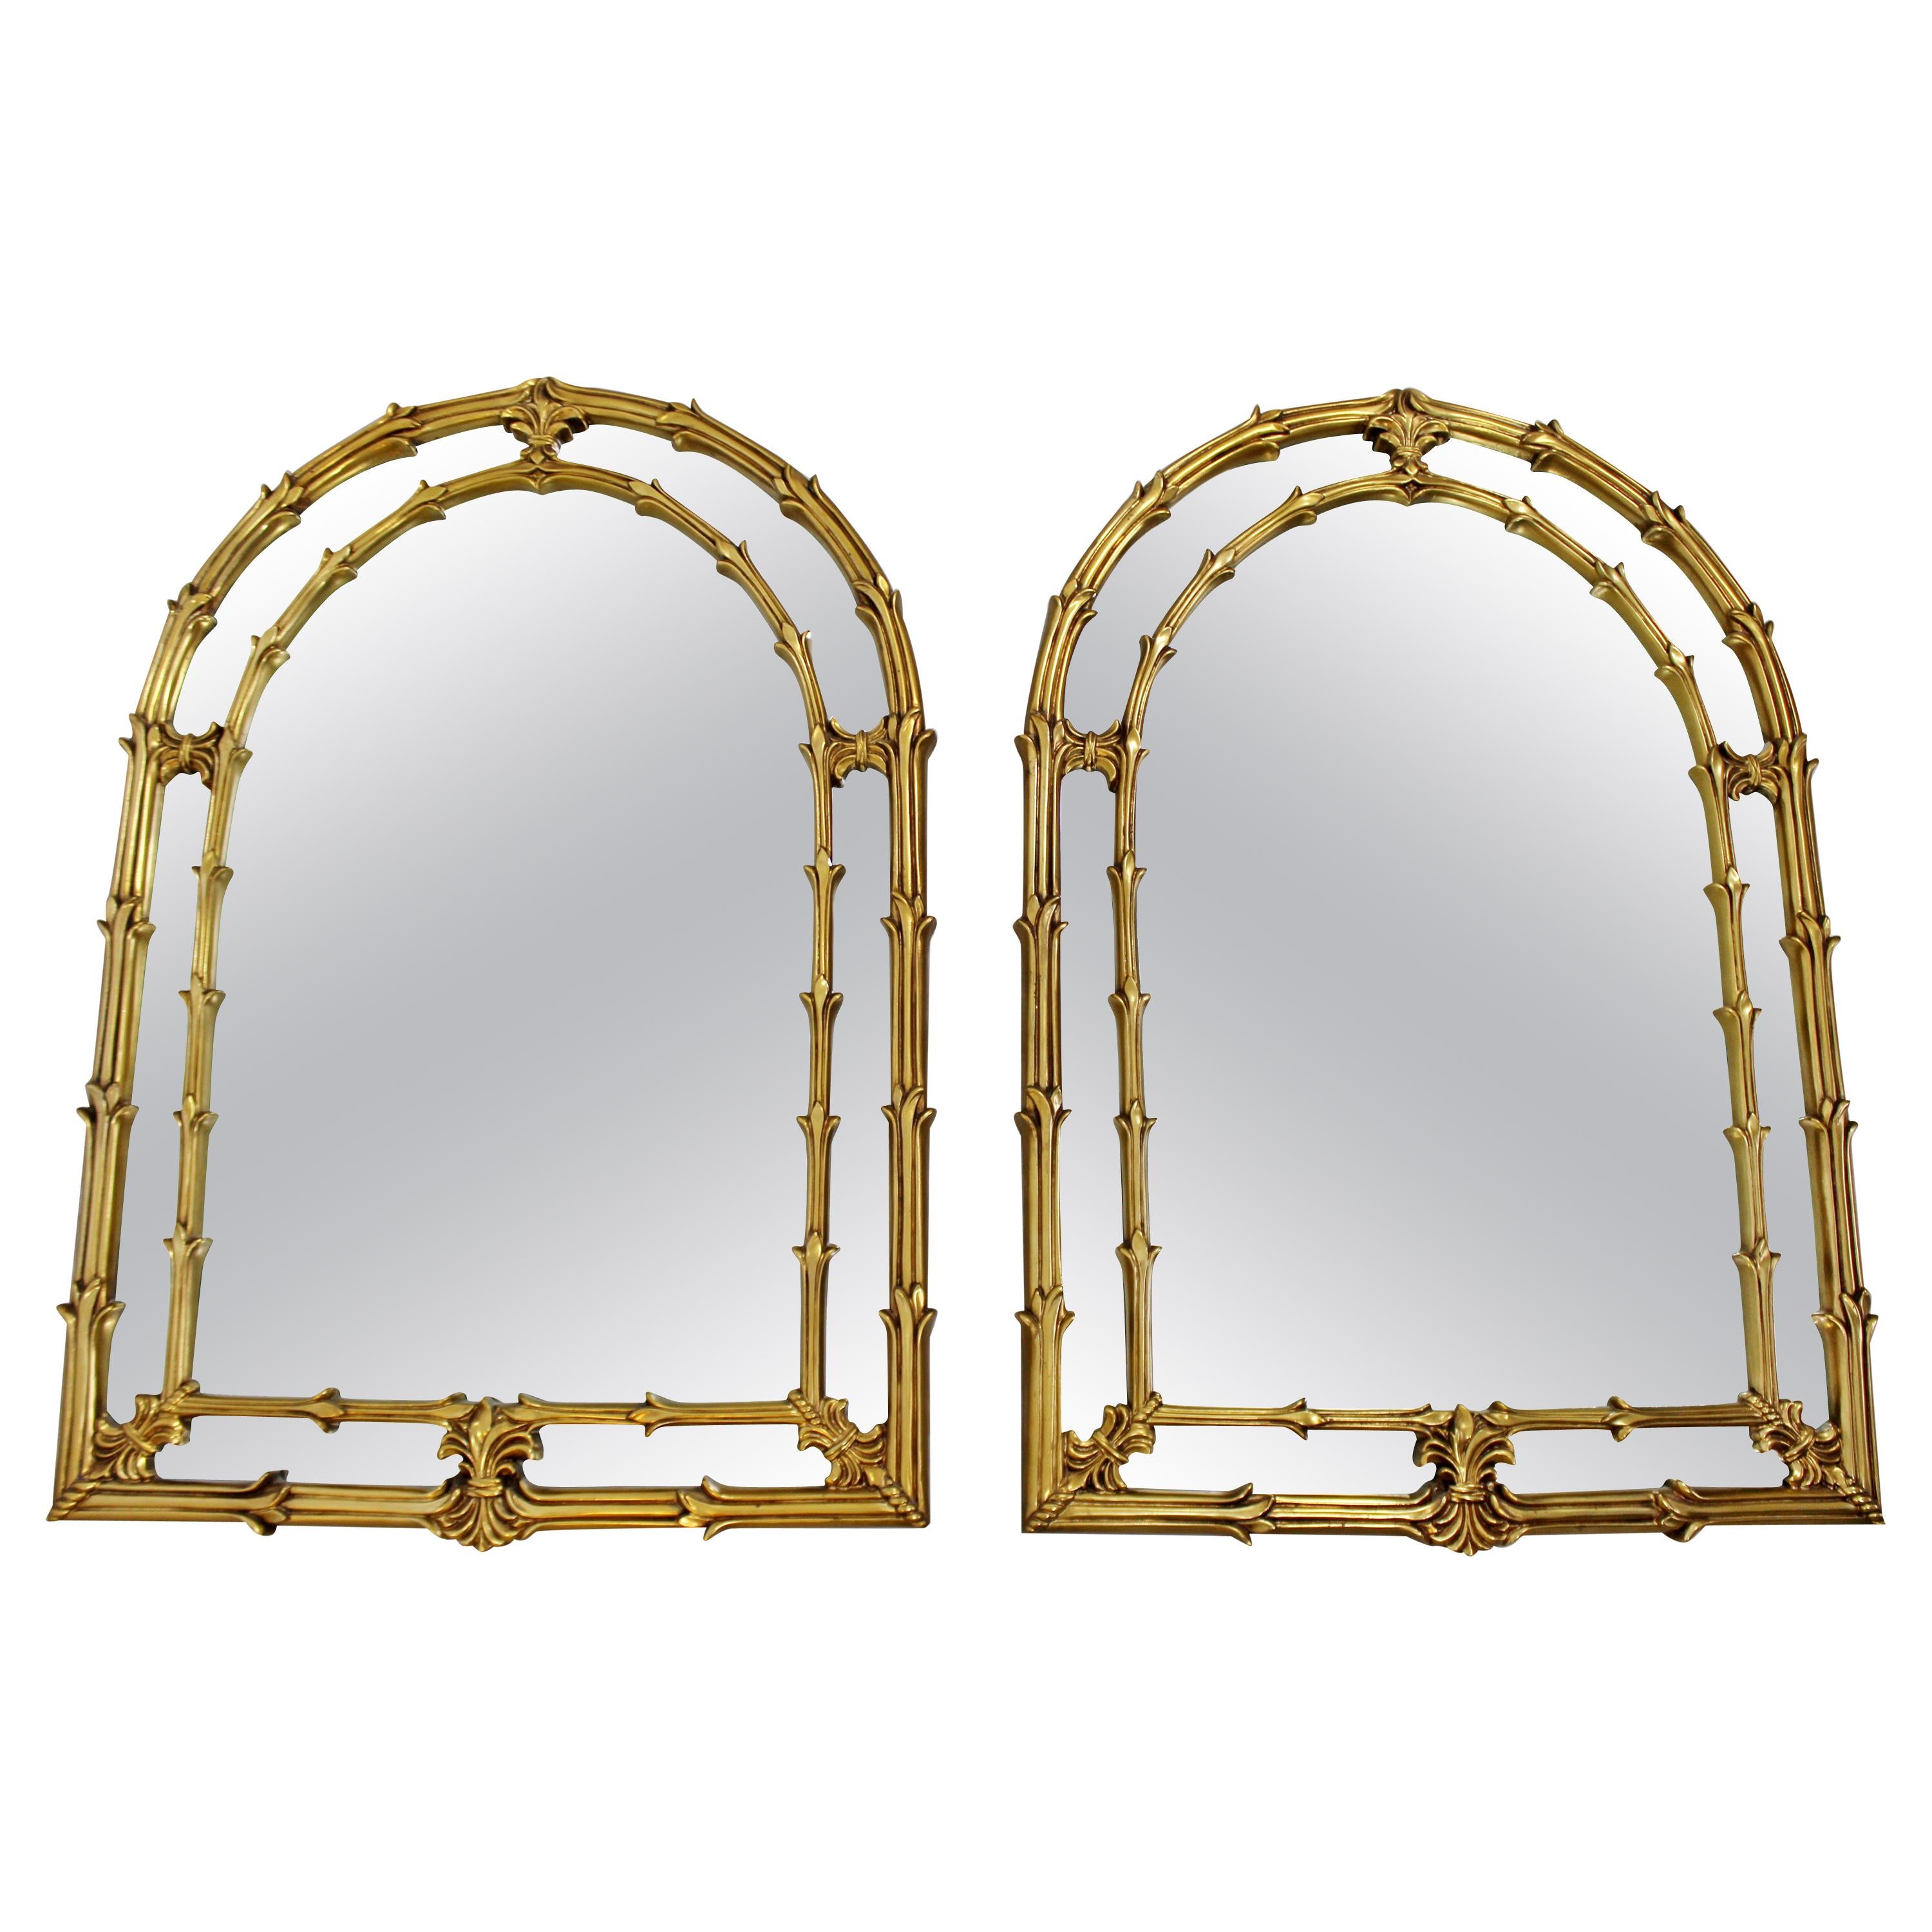 Modern Hollywood Regency Pair of Monumental Italian Gold Gilt Arched Art Mirrors